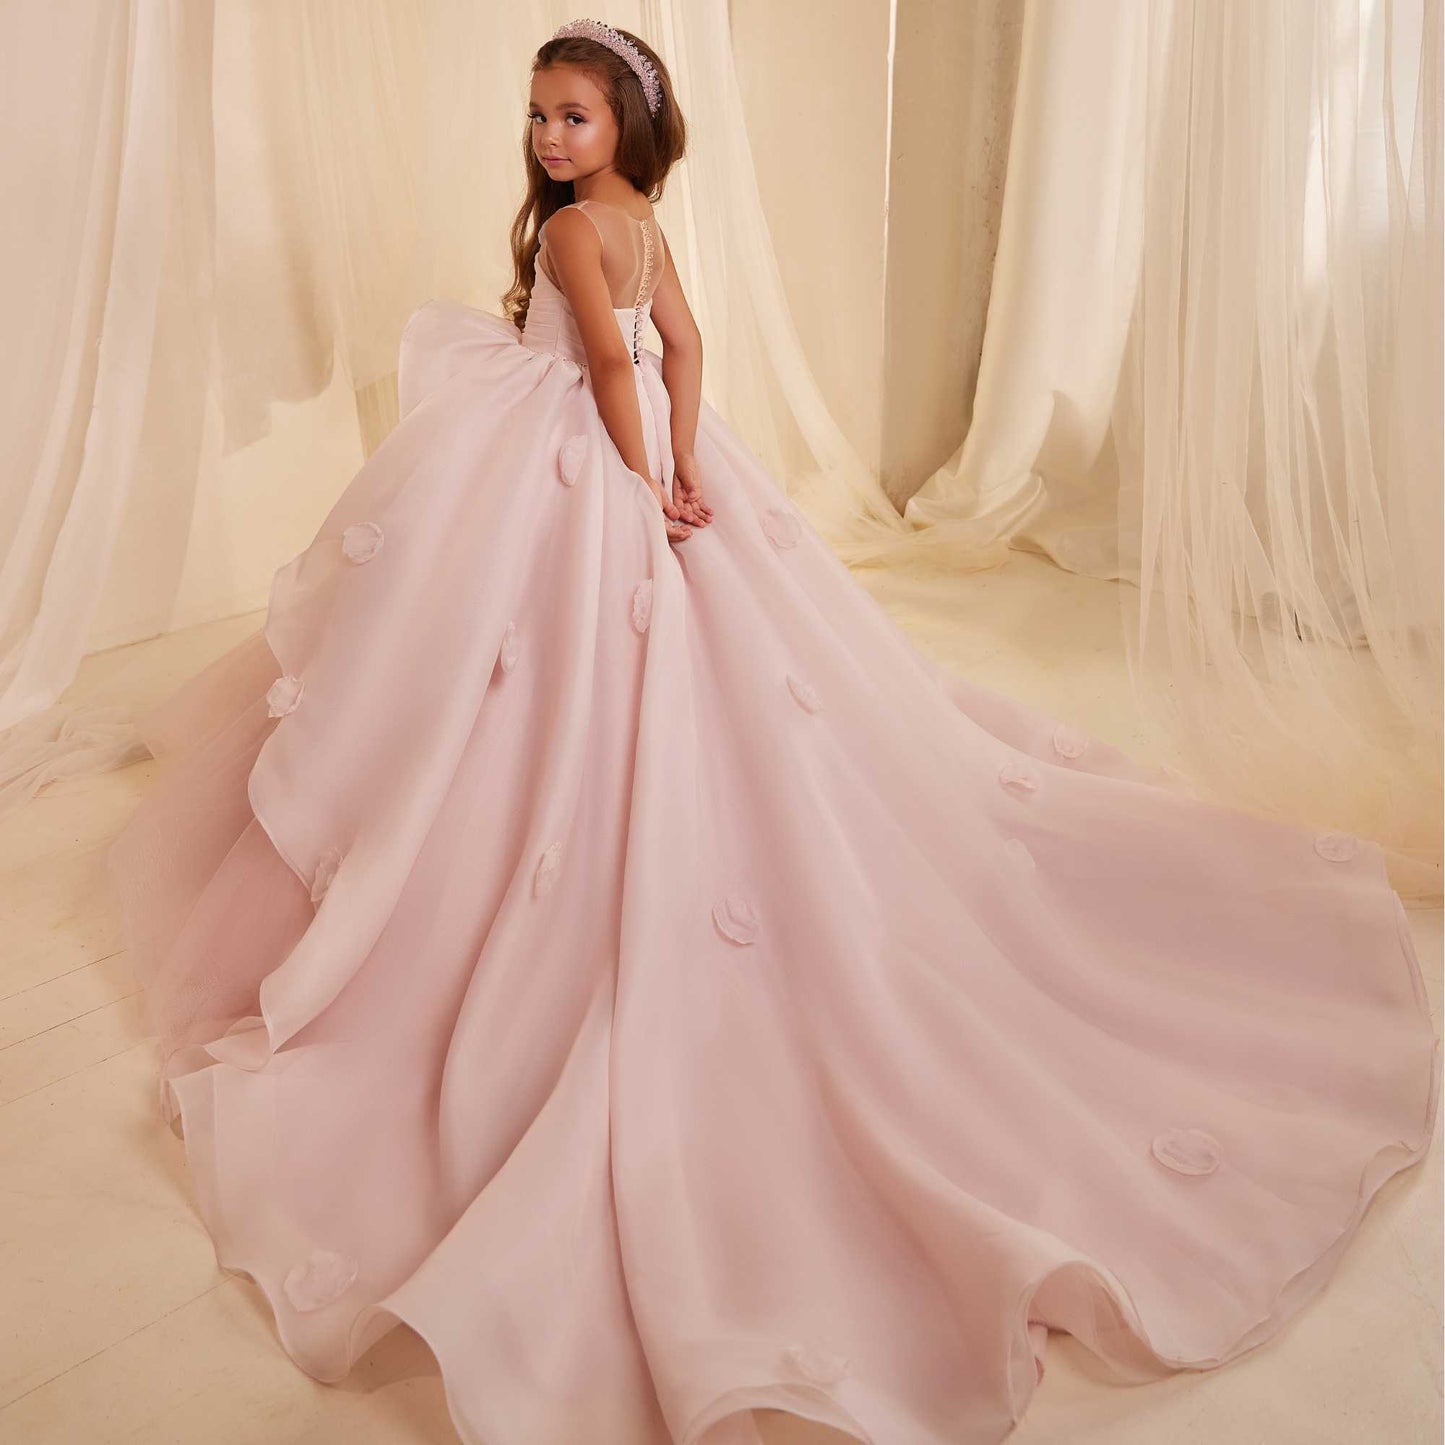 ball gown princess dress in pink